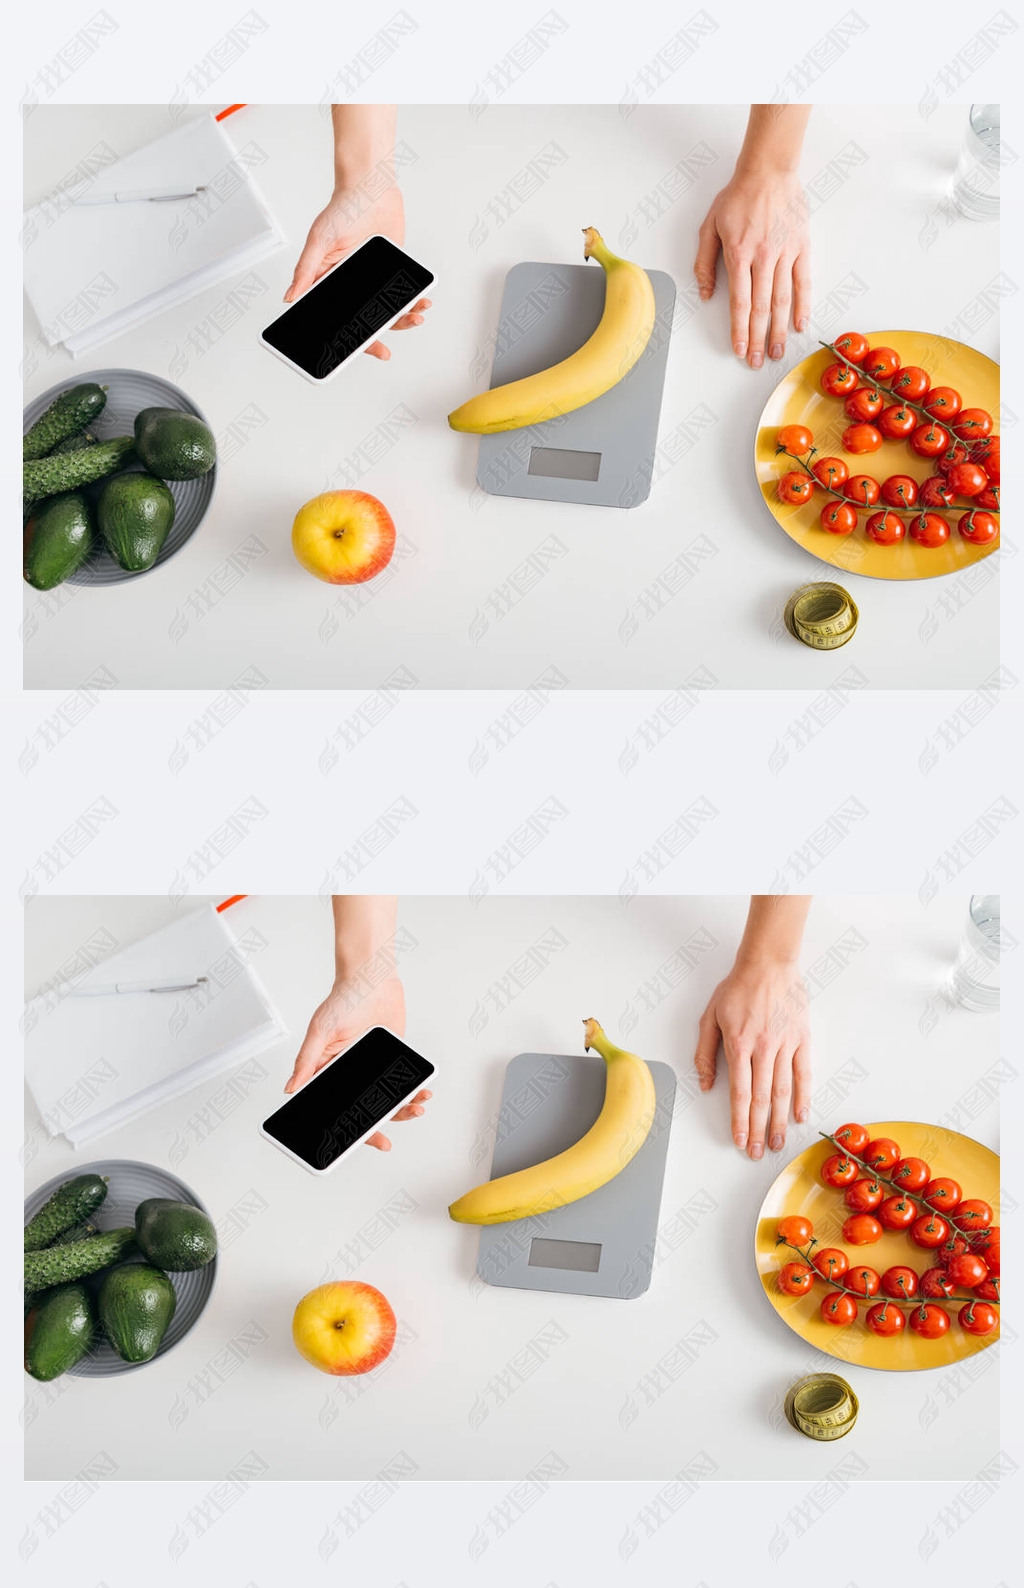 Top view of girl holding artphone while weighing banana on kitchen table, calorie counting diet